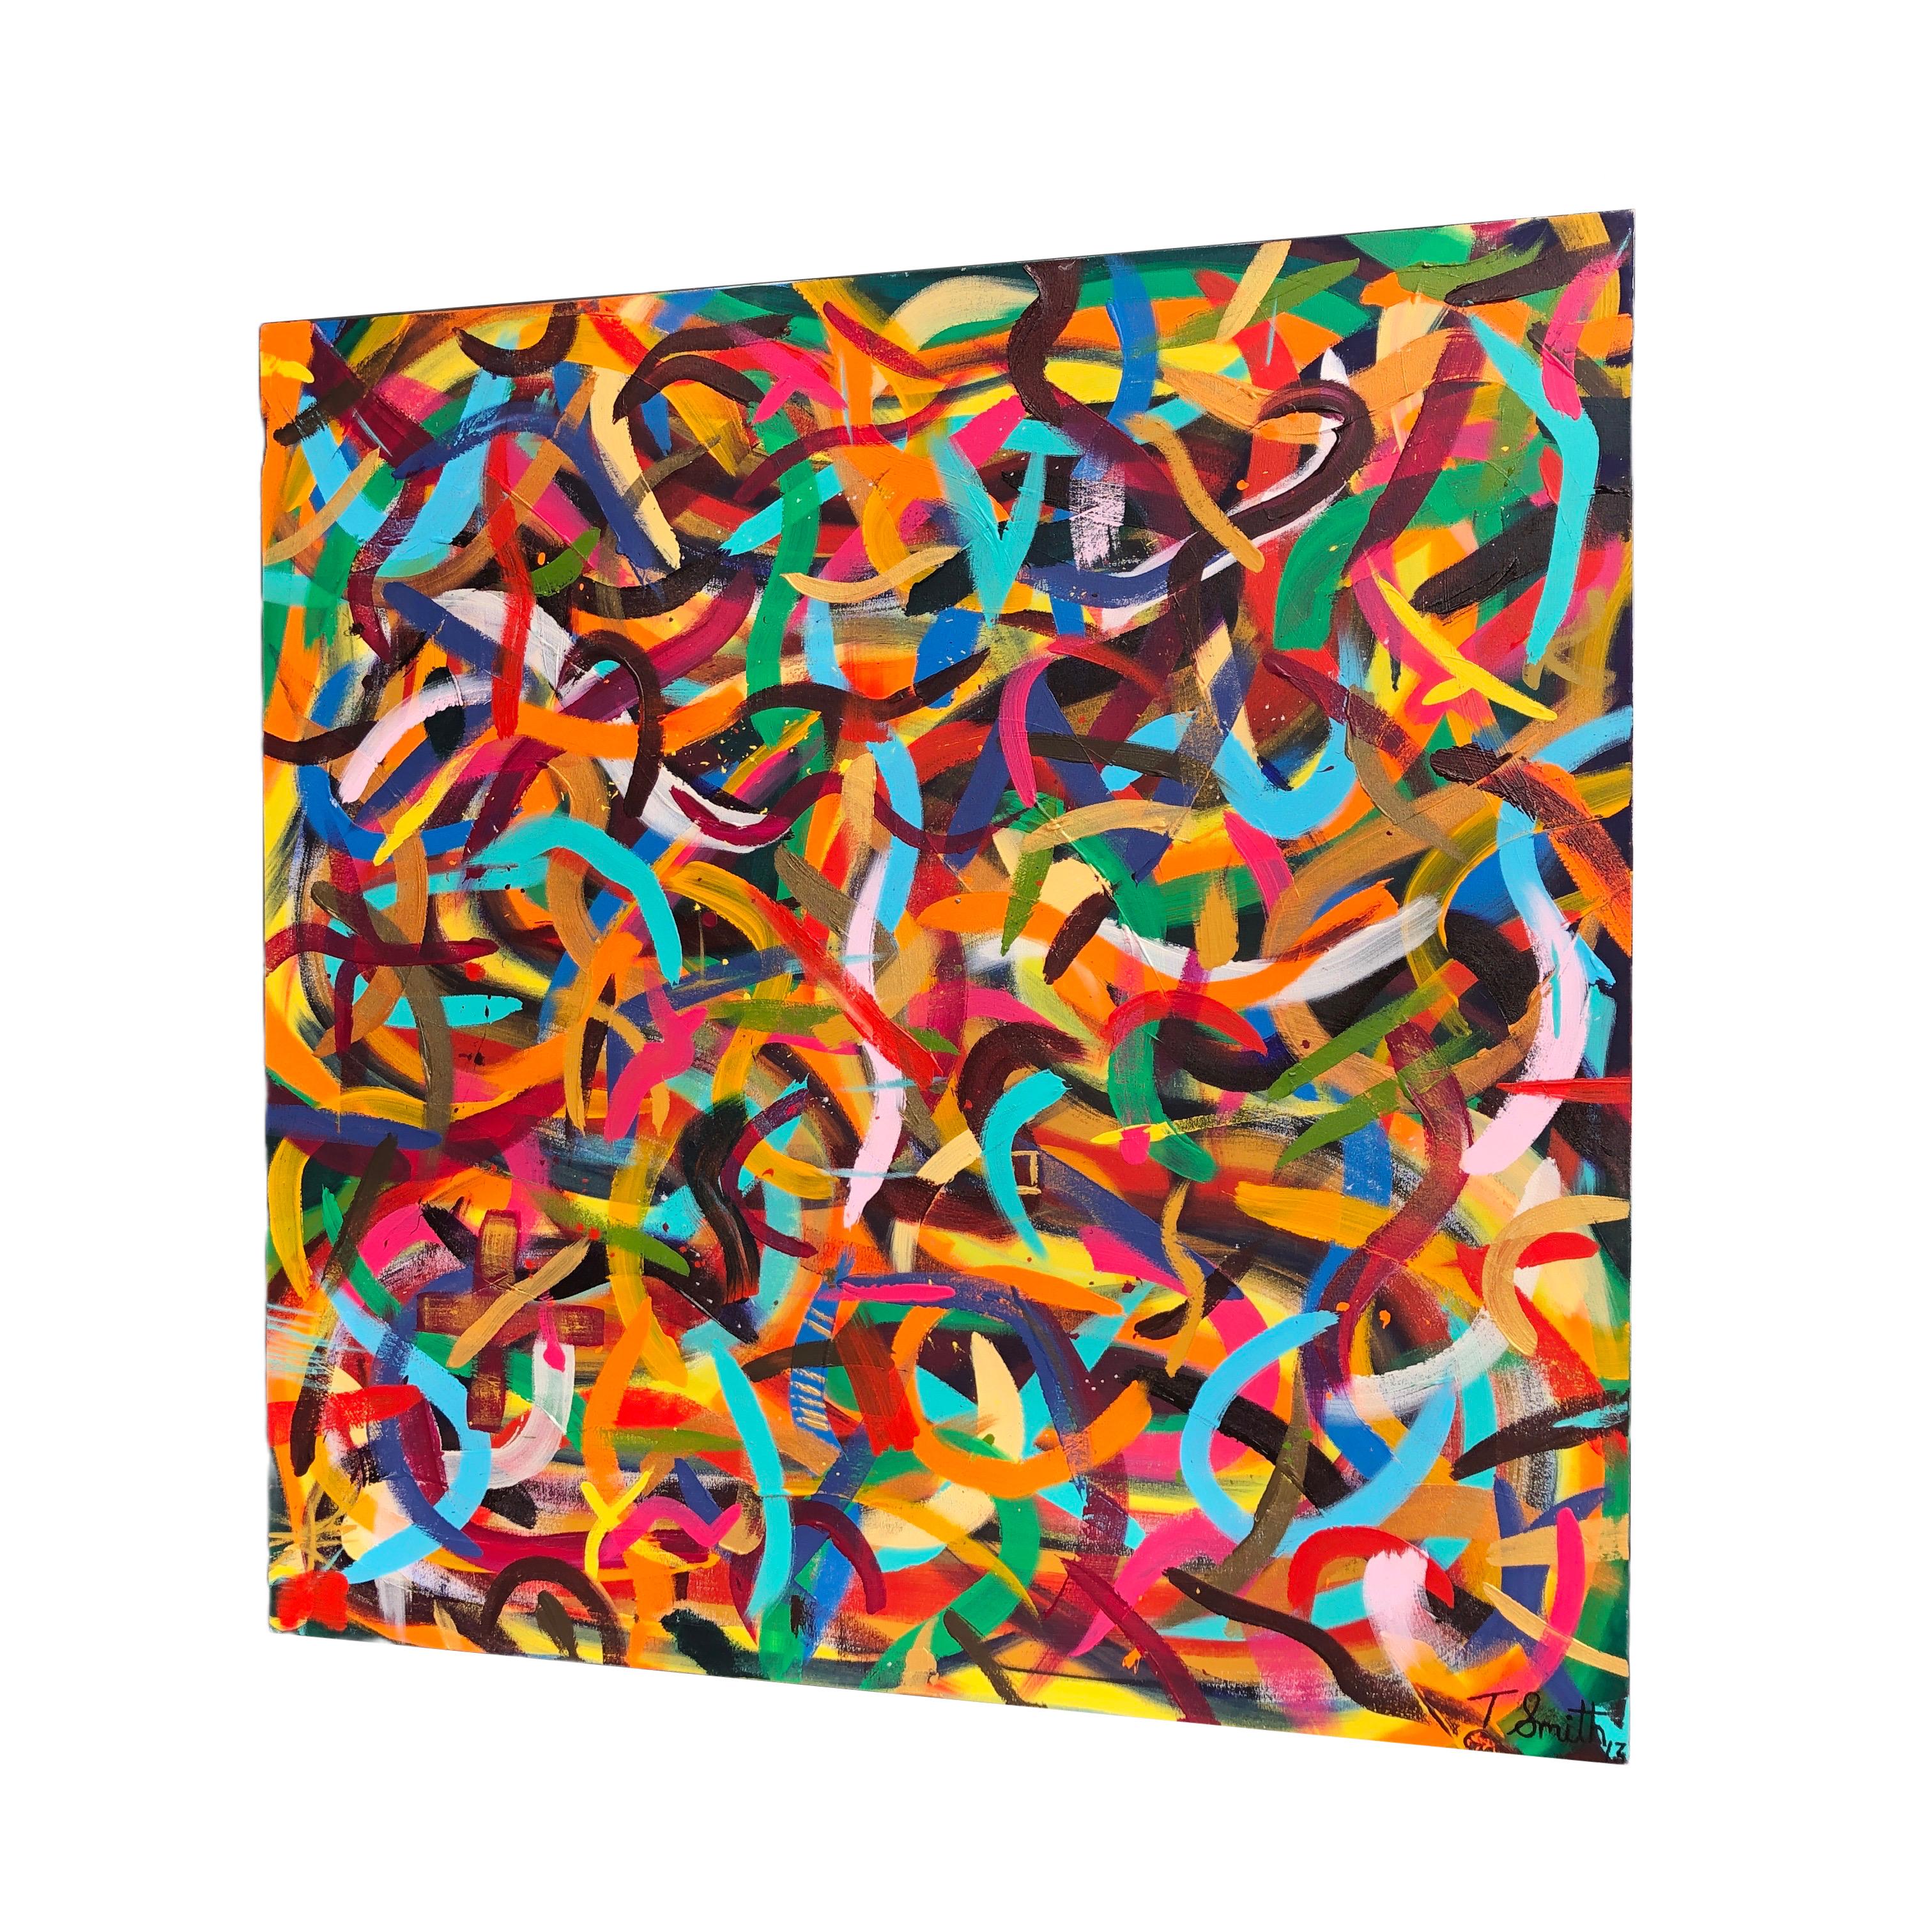 Just Dance was painted by Troy Smith with acrylic paint on canvas. Just Dance is a vibrant energetic painting that leaps right off the canvas. Hundreds of individual different coloured swirling lines criss-cross each other dancing and singing with